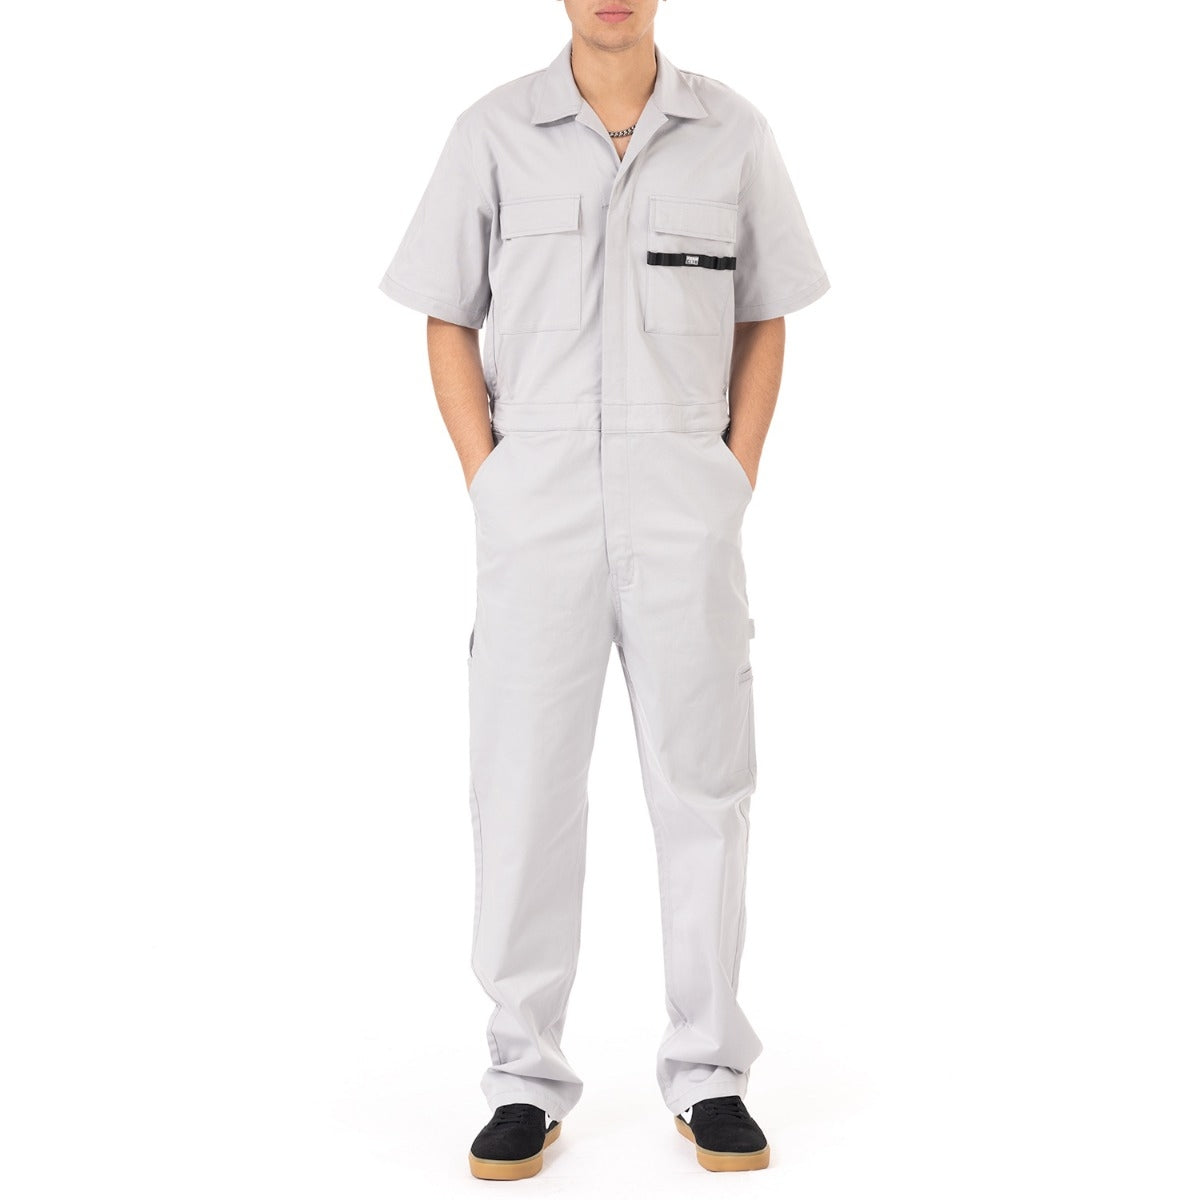 Pro Club Men's Workwear Mechanic's Short Sleeve Coverall - Silver